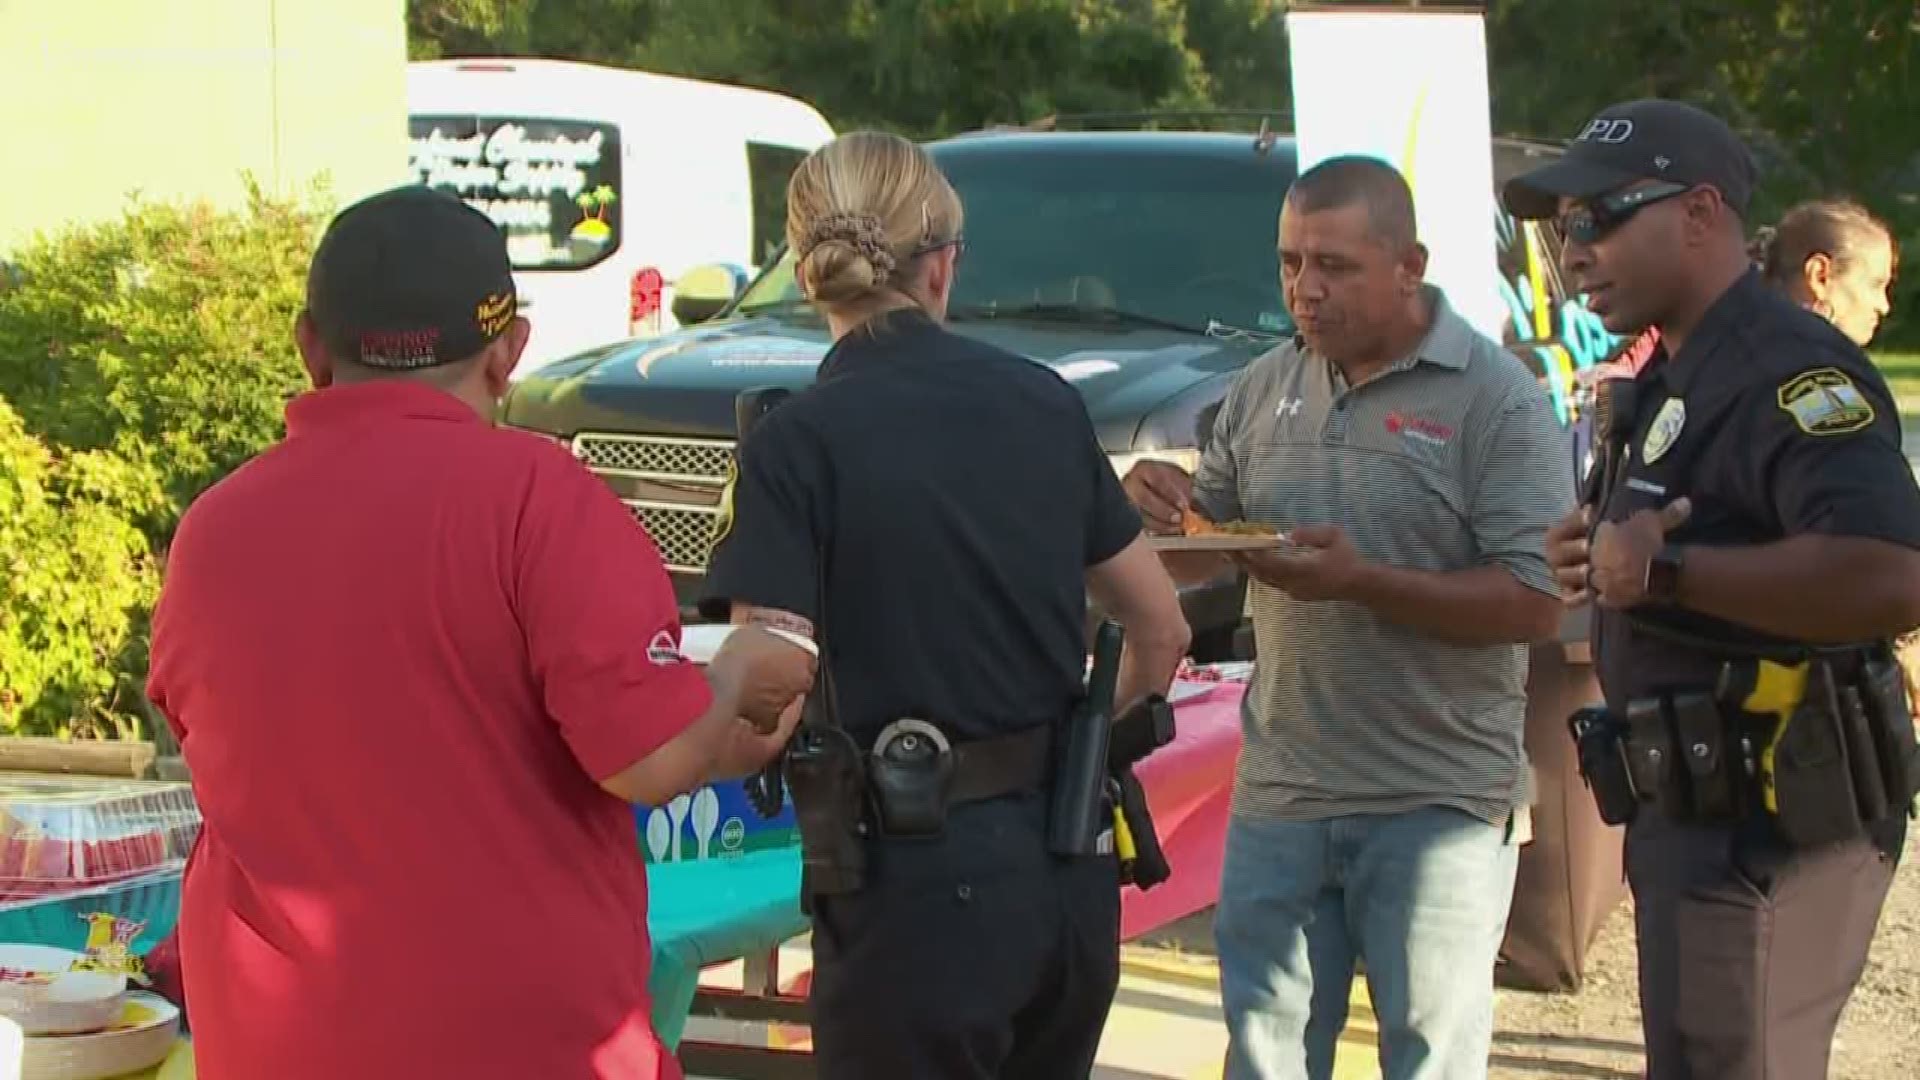 In Virginia Beach, police held an event at La Tapatia 2 to meet Latino residents and addressed questions or concerns they had. Across Hampton Roads, police connected with their community members.